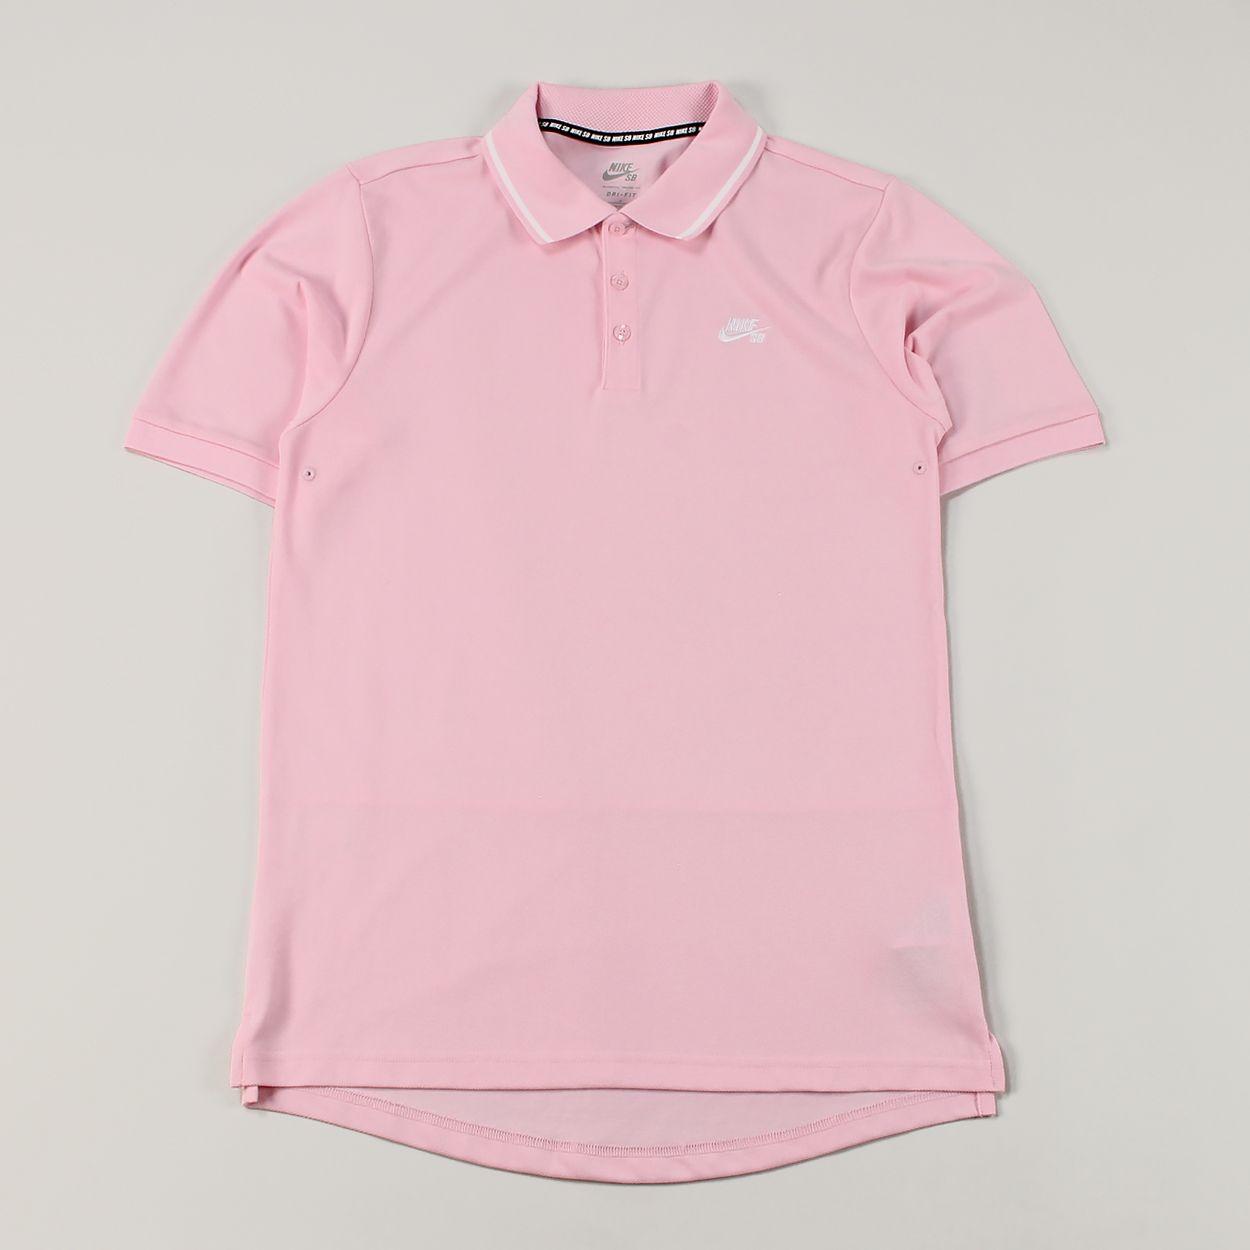 Pink Polo Logo - Nike SB Dry Pique Material Embroidered Logo Tip Polo Shirt Pink £30.00